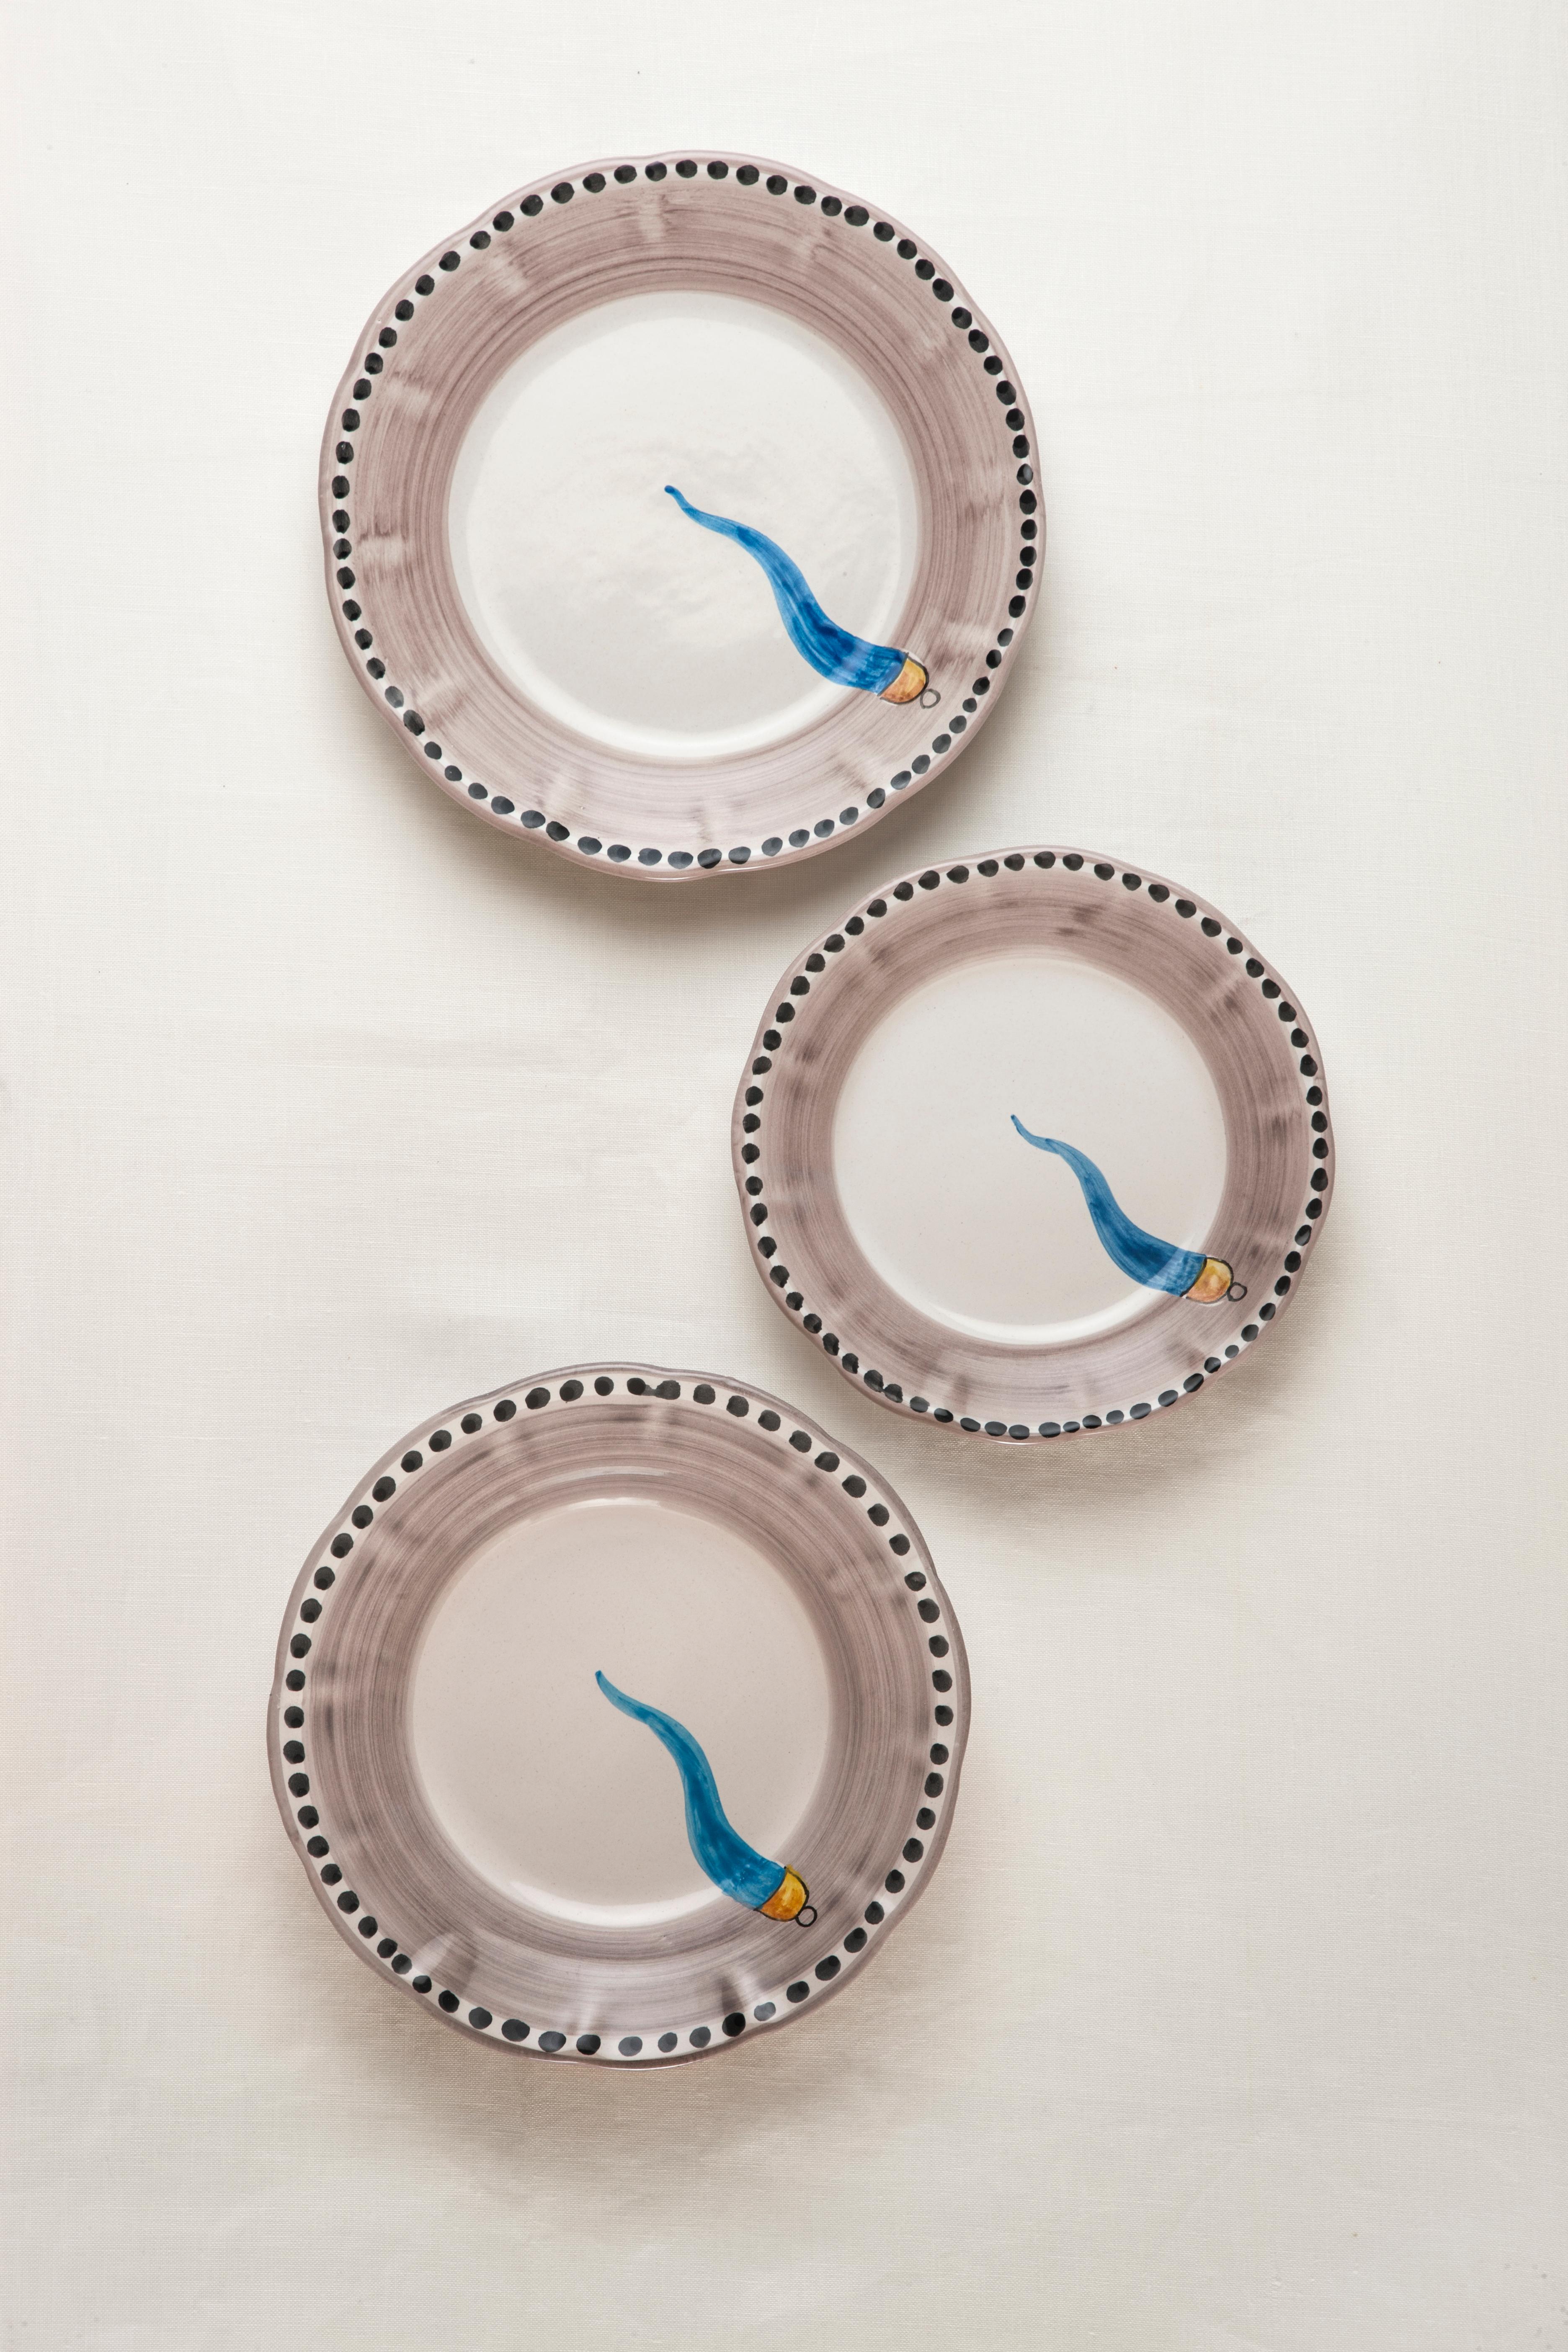 Contemporary 21st Century Vietri Ceramic Round Service Plate and Fruit Plates Made in Italy  For Sale